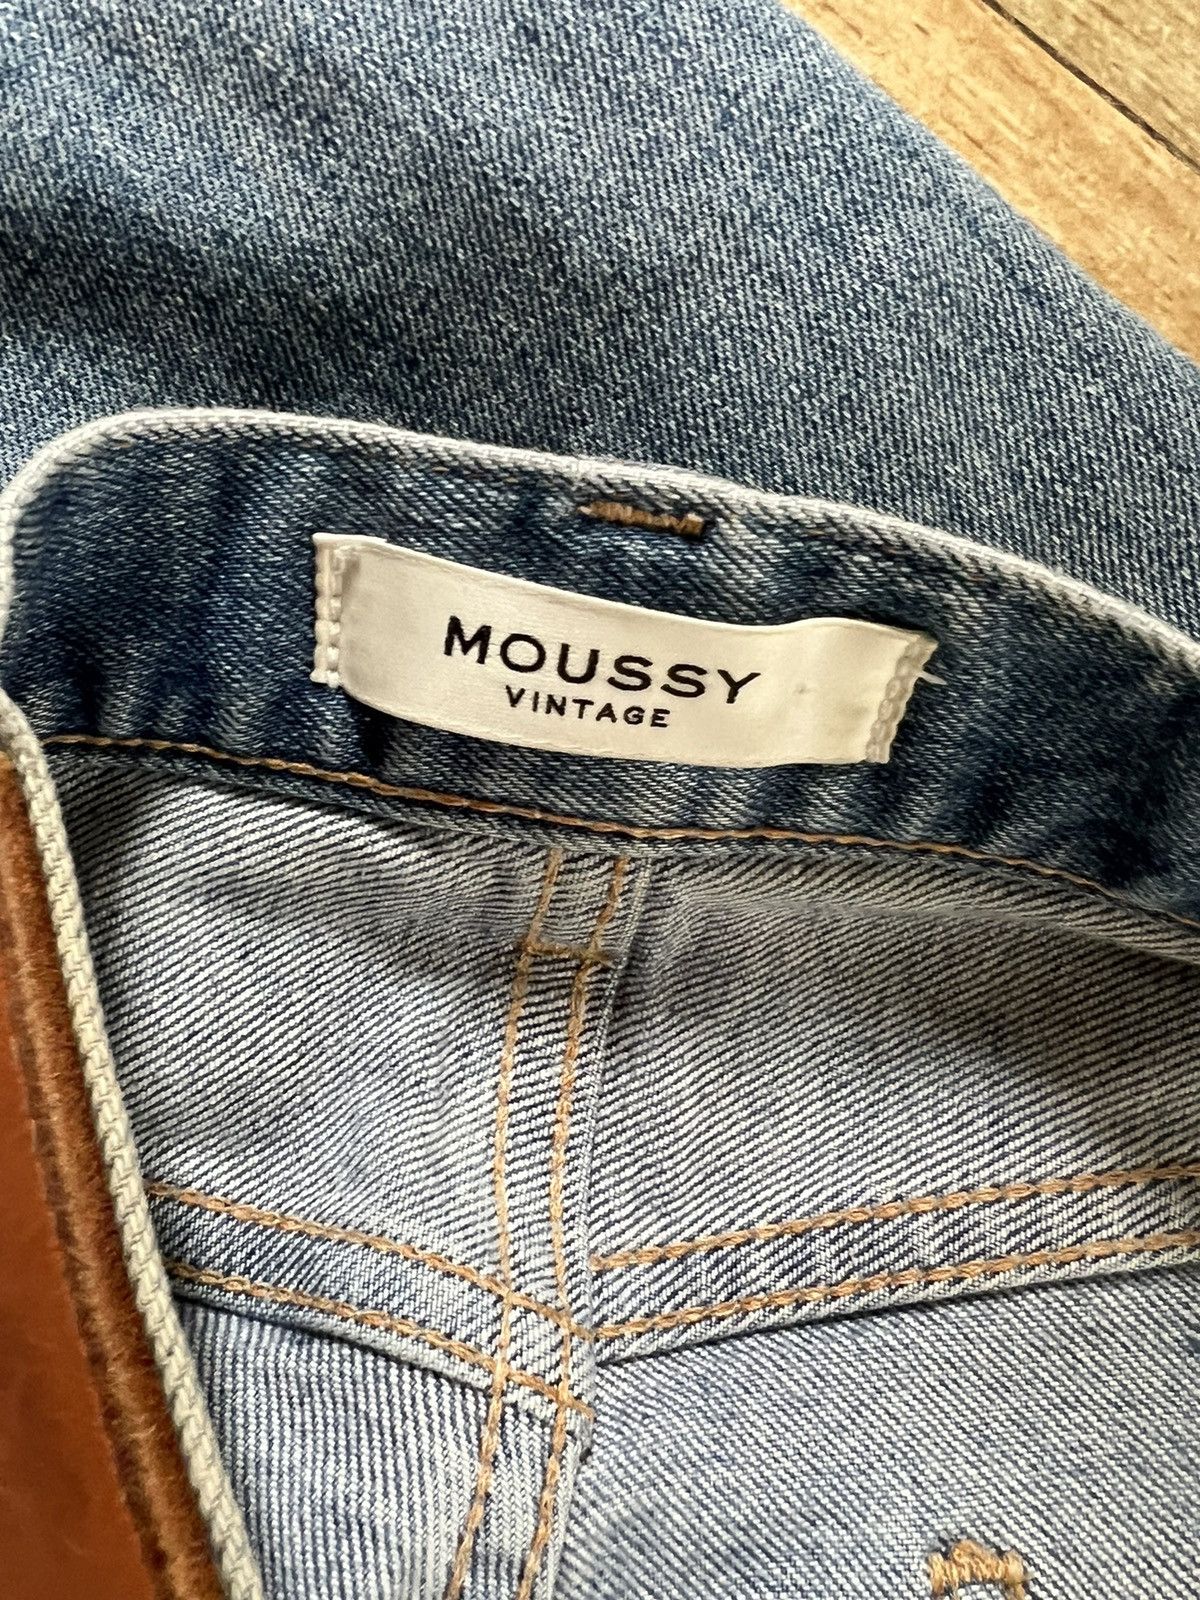 Japanese Brand Moussy Vintage Distressed Blue Jeans Size 27" / US 4 / IT 40 - 7 Thumbnail